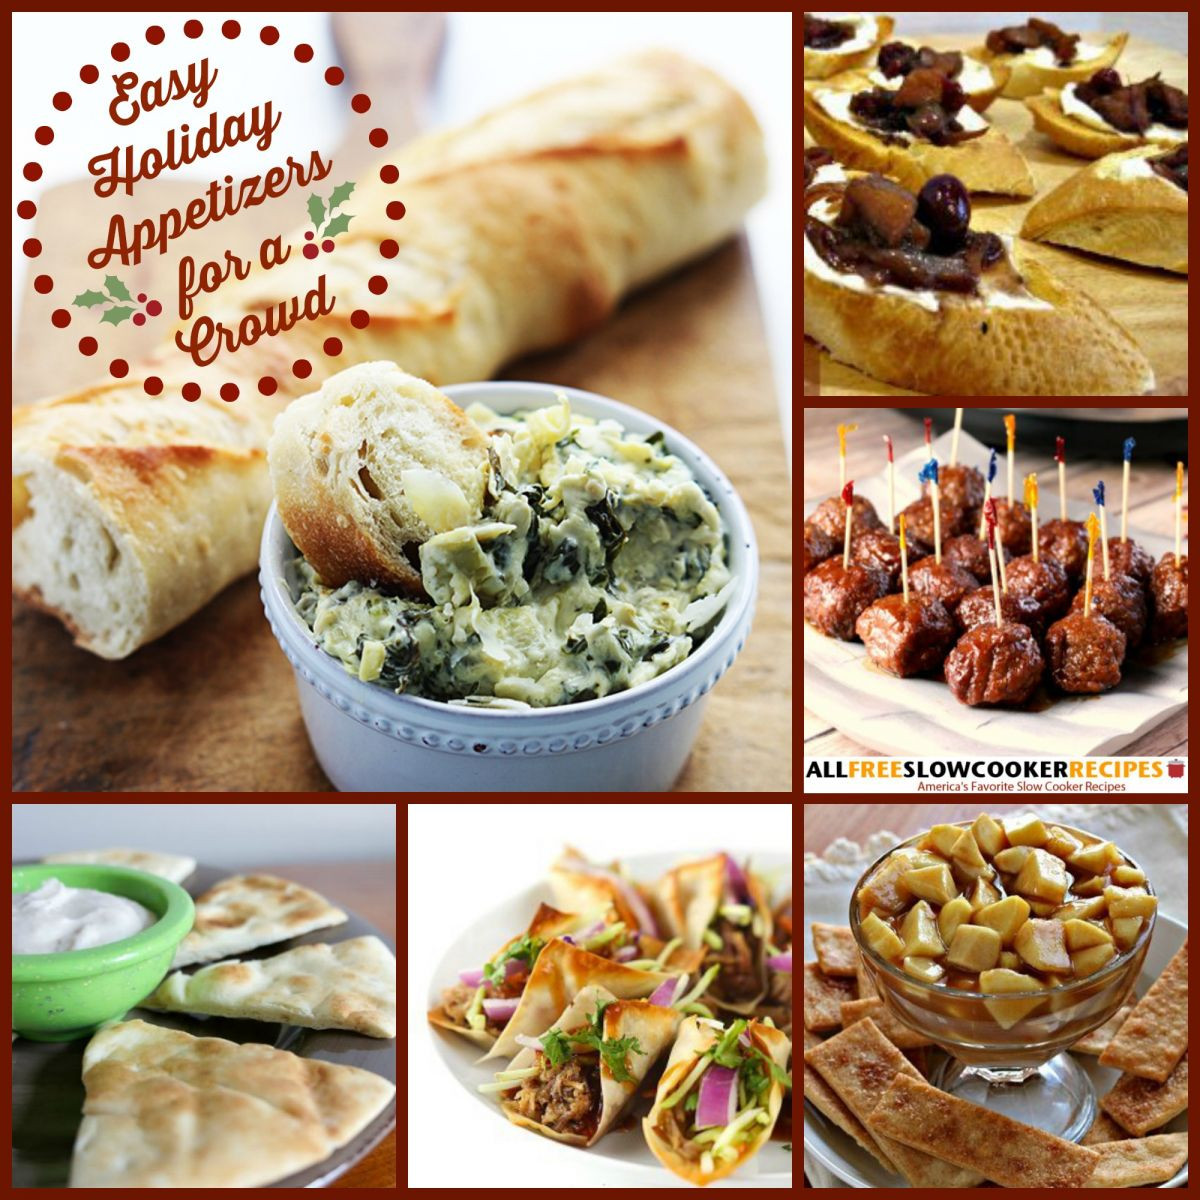 Slow Cooker Holiday Appetizers
 Slow Cooker Christmas Recipes 8 Christmas Appetizer